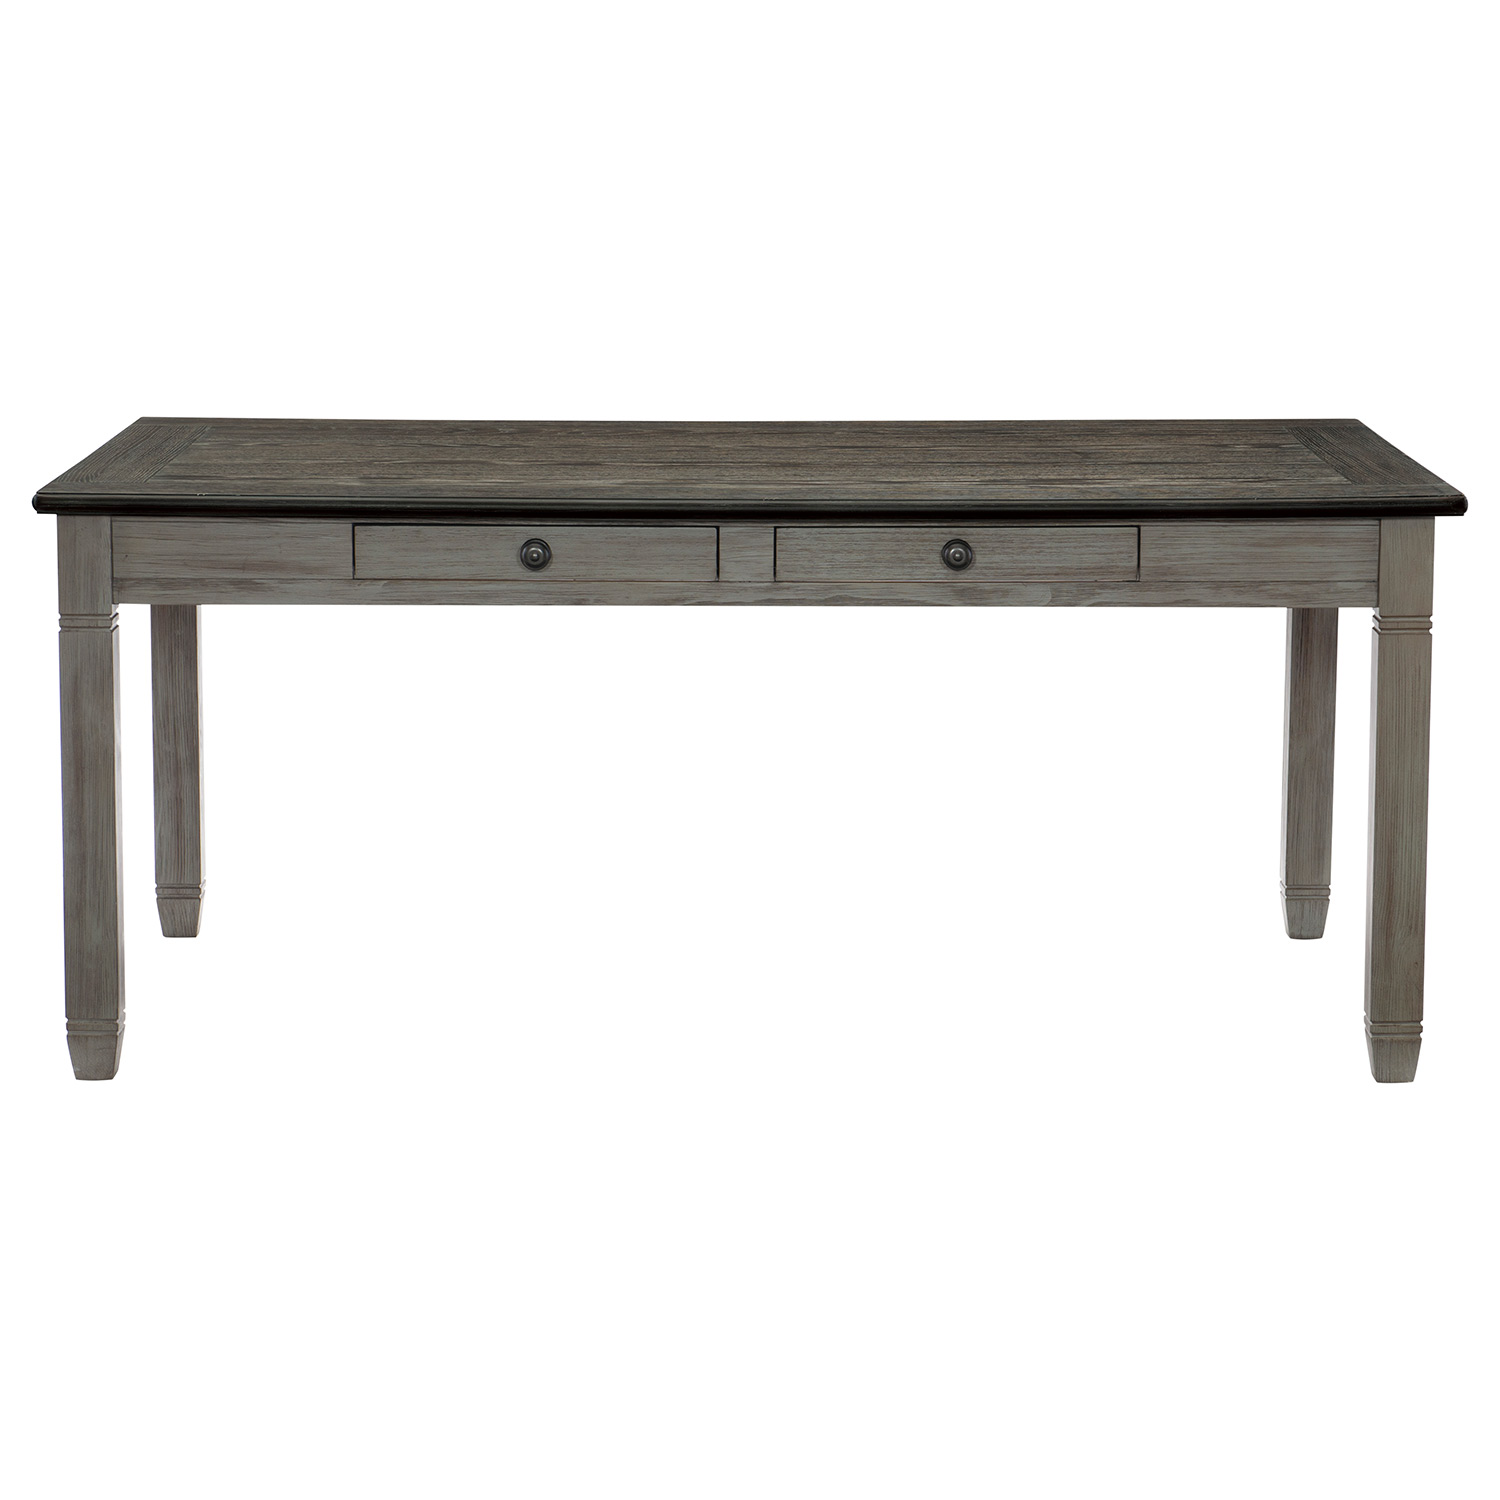 Homelegance Granby Dining Table - Antique Gray and Coffee